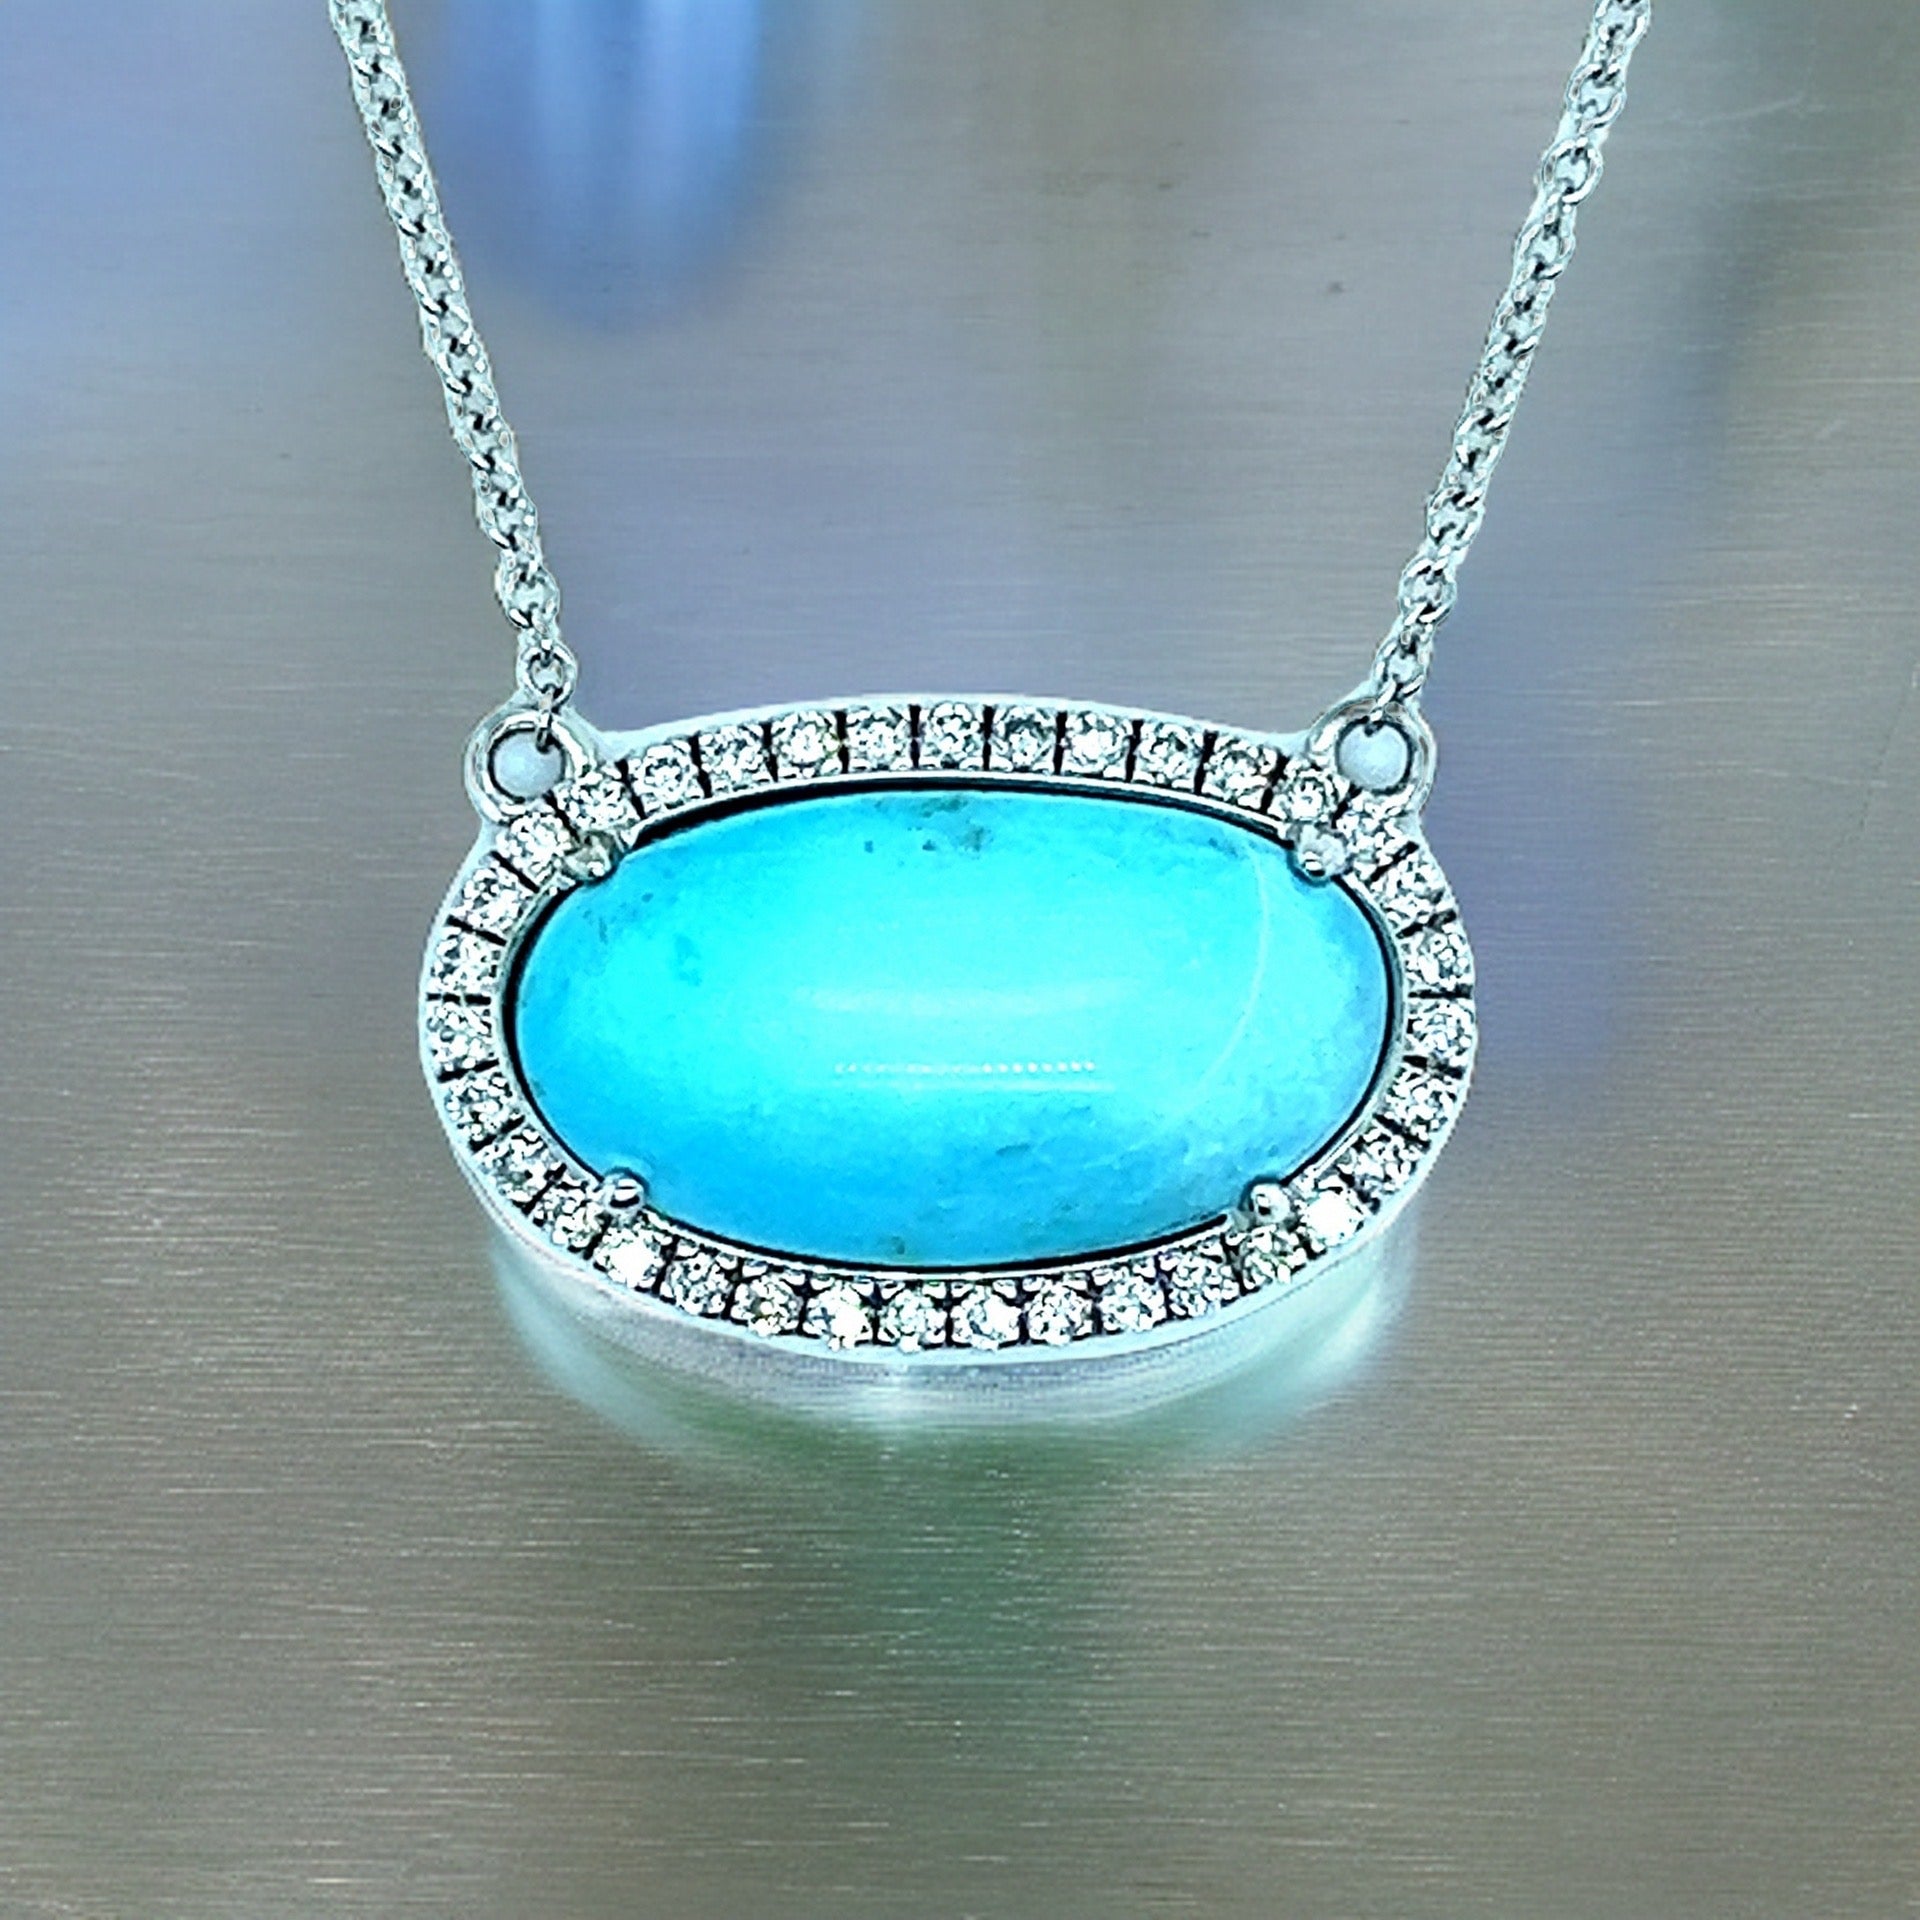 Natural Persian Turquoise Diamond Halo Pendant With Chain 18.5" 14k WG 8.1 TCW Certified $4,975 300679 - Certified Fine Jewelry